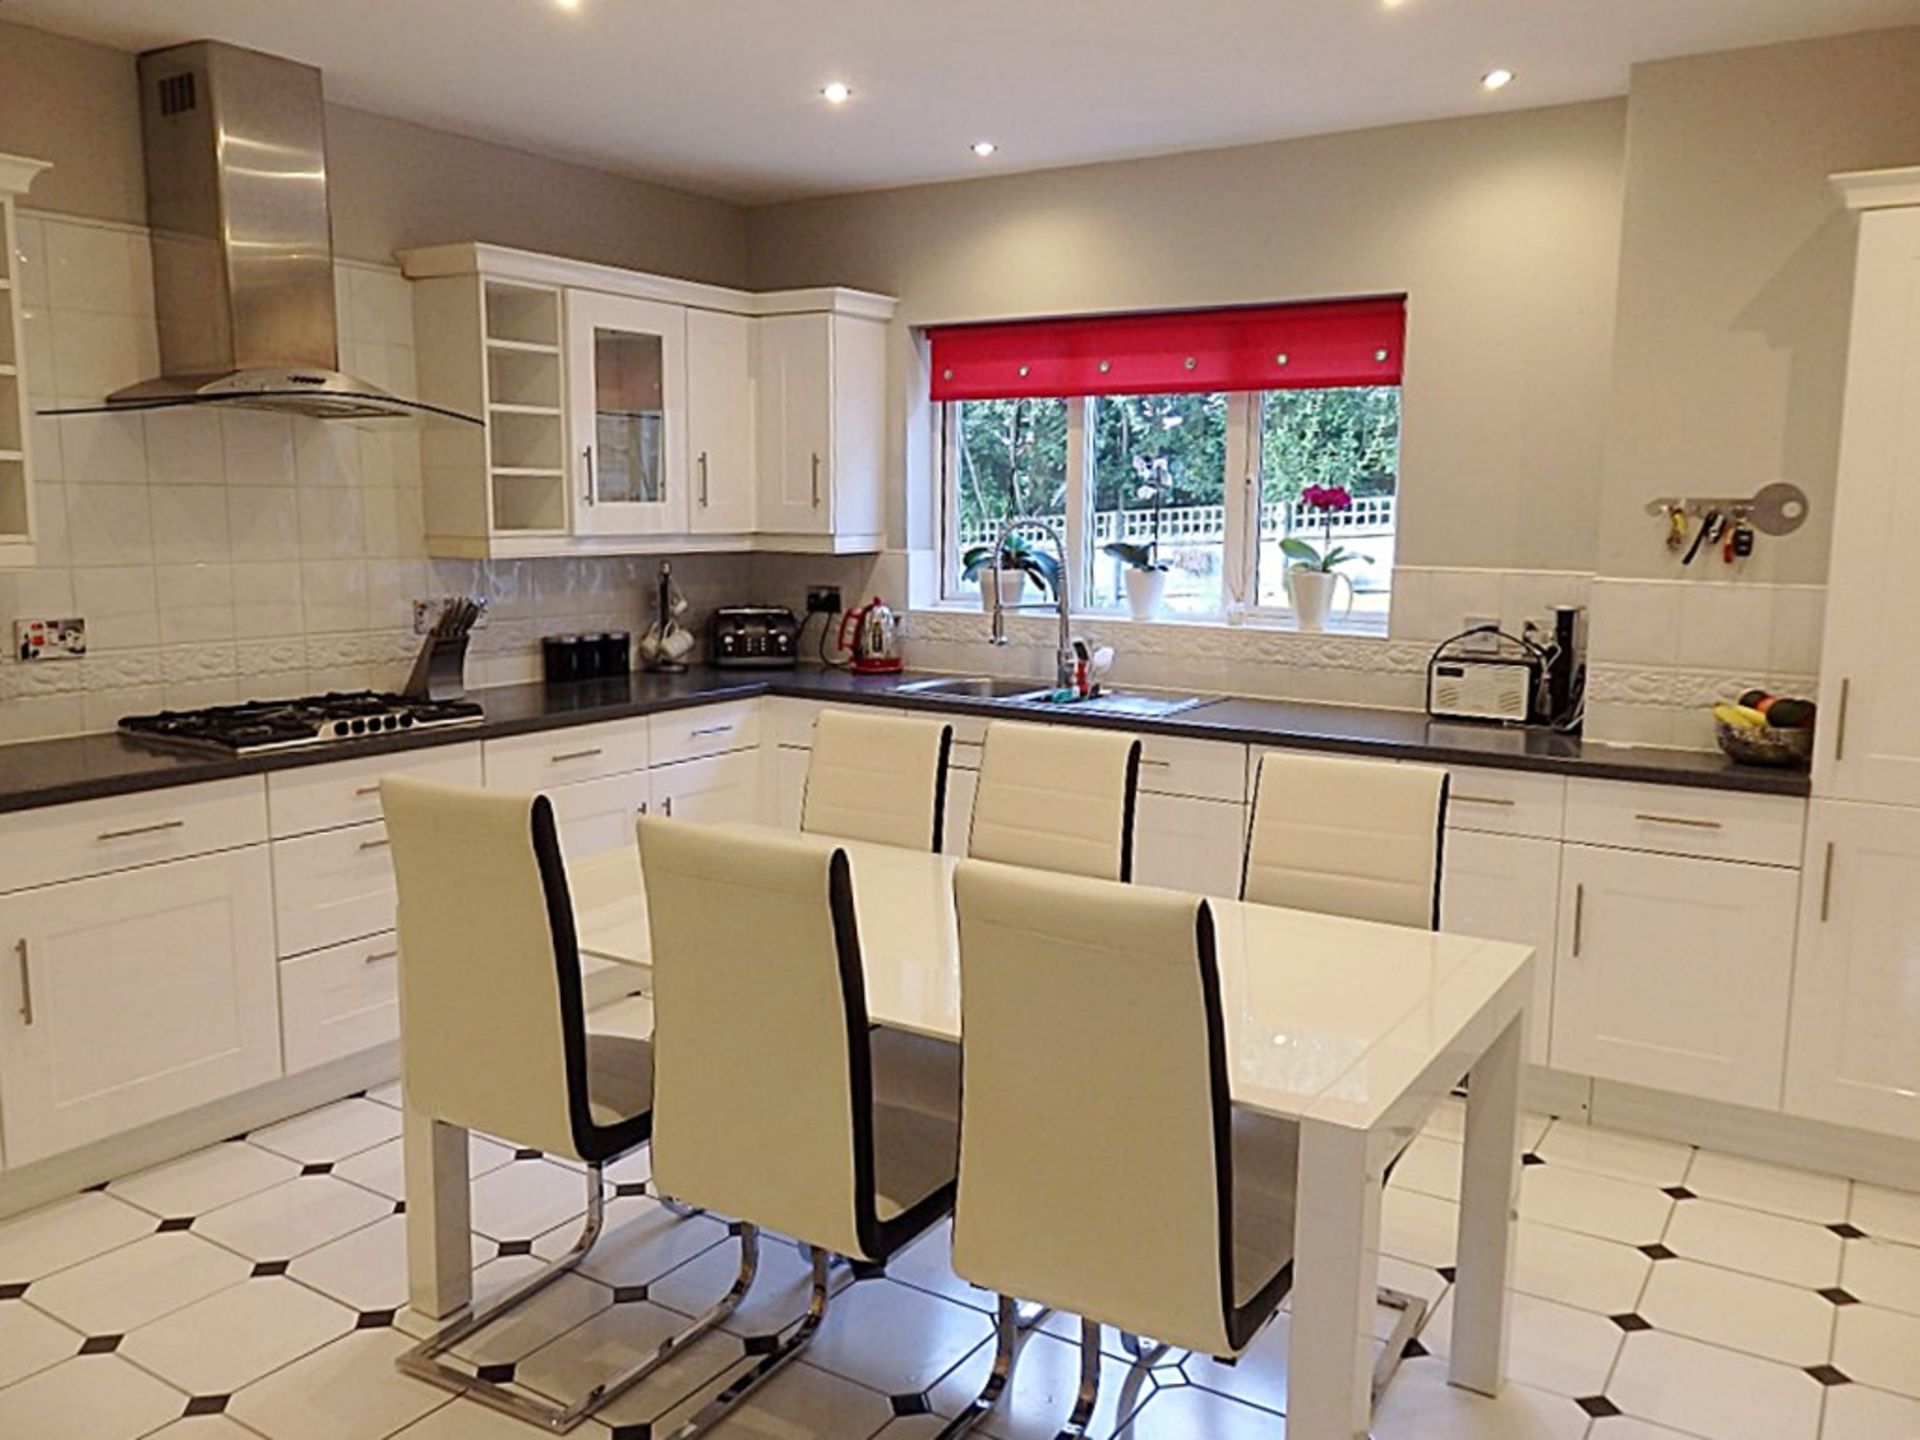 1 x White High Gloss kitchen With Neff Integrated Dishwasher, 5 Ring Stainless Steel Hob, and - Image 16 of 20